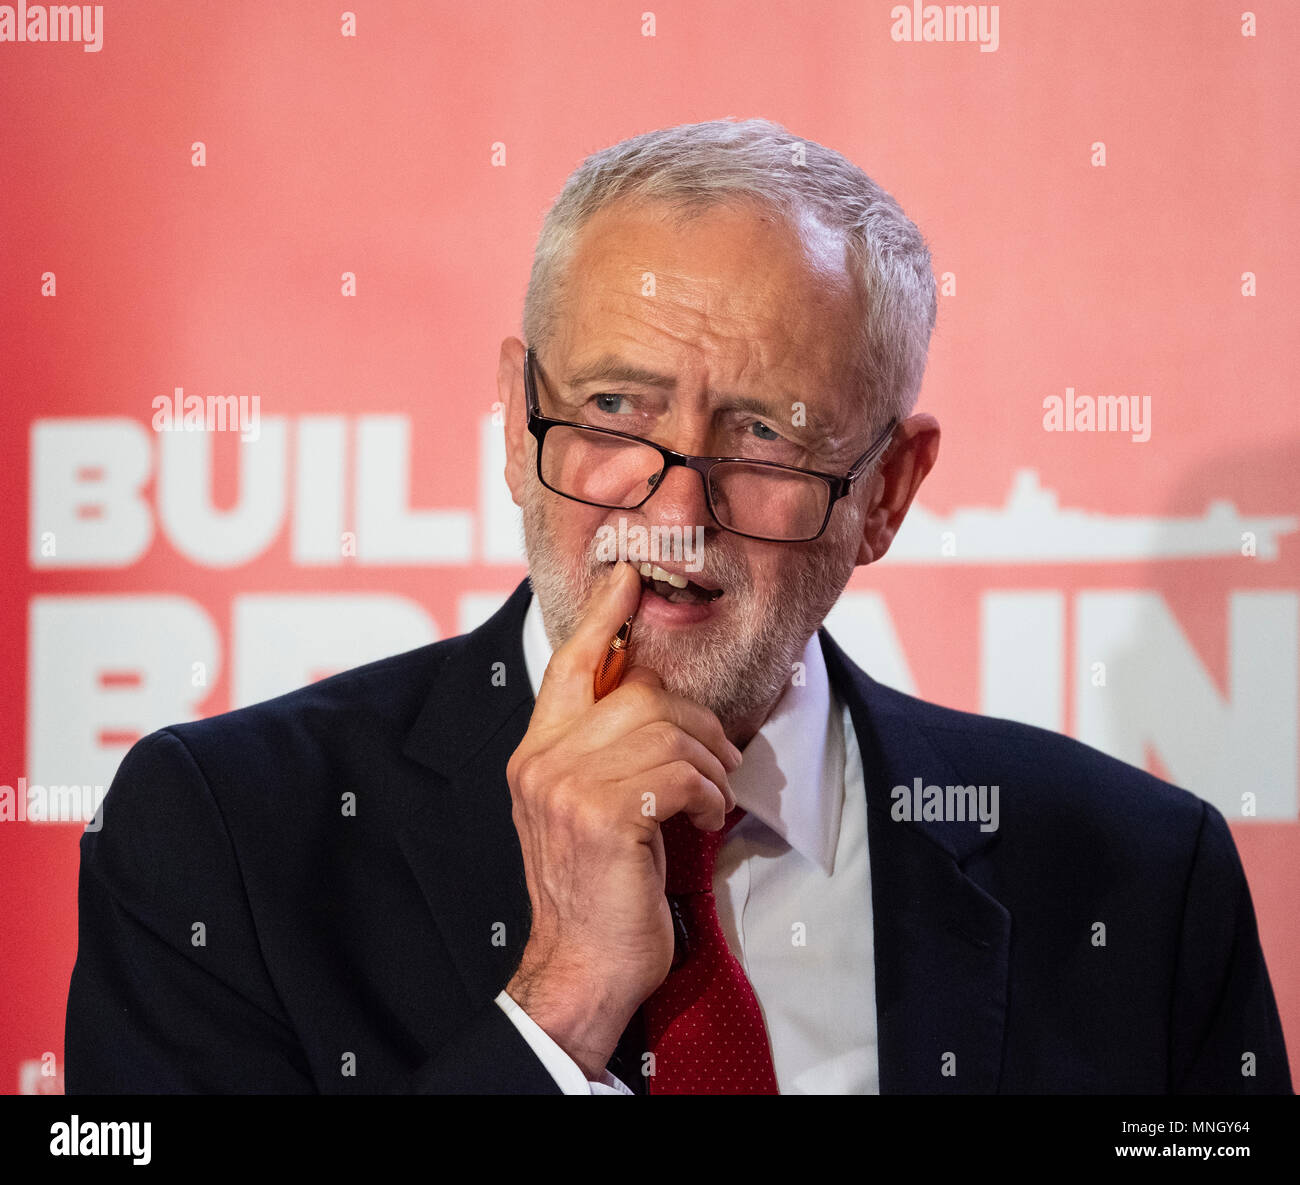 Glasgow, UK. 11 May, 2018. Labour Leader Jeremy Corbyn giving a speech in Govan, Glasgow in which he said that a Labour government will proactively su Stock Photo